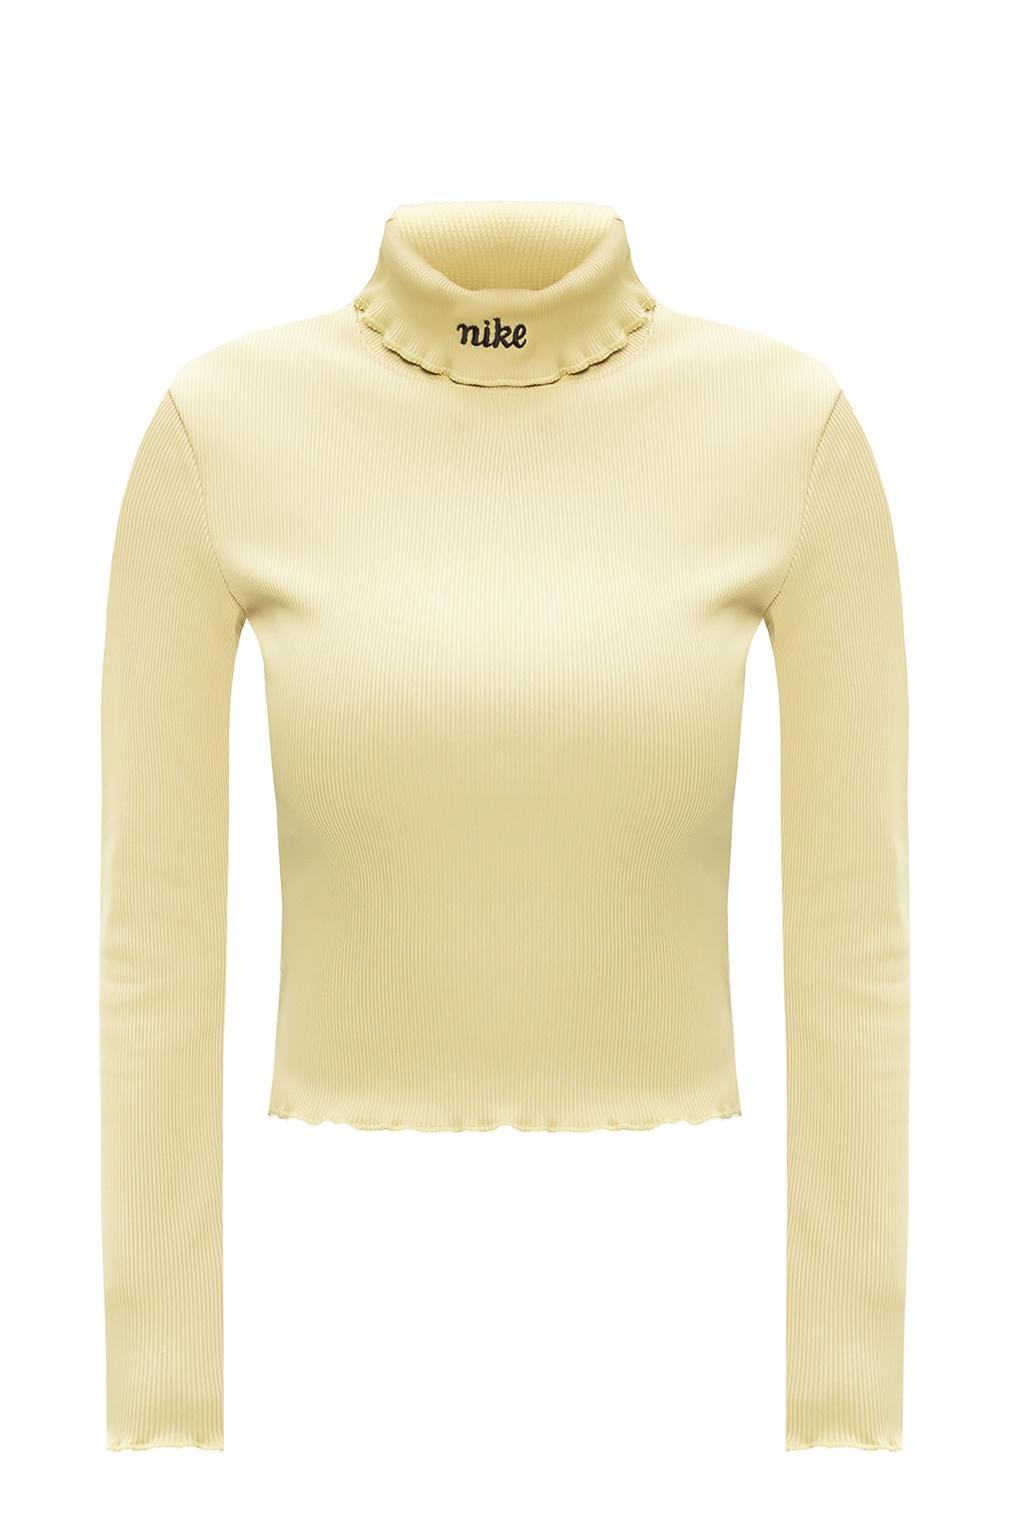 Nike Ribbed Turtleneck Top in Green | Lyst